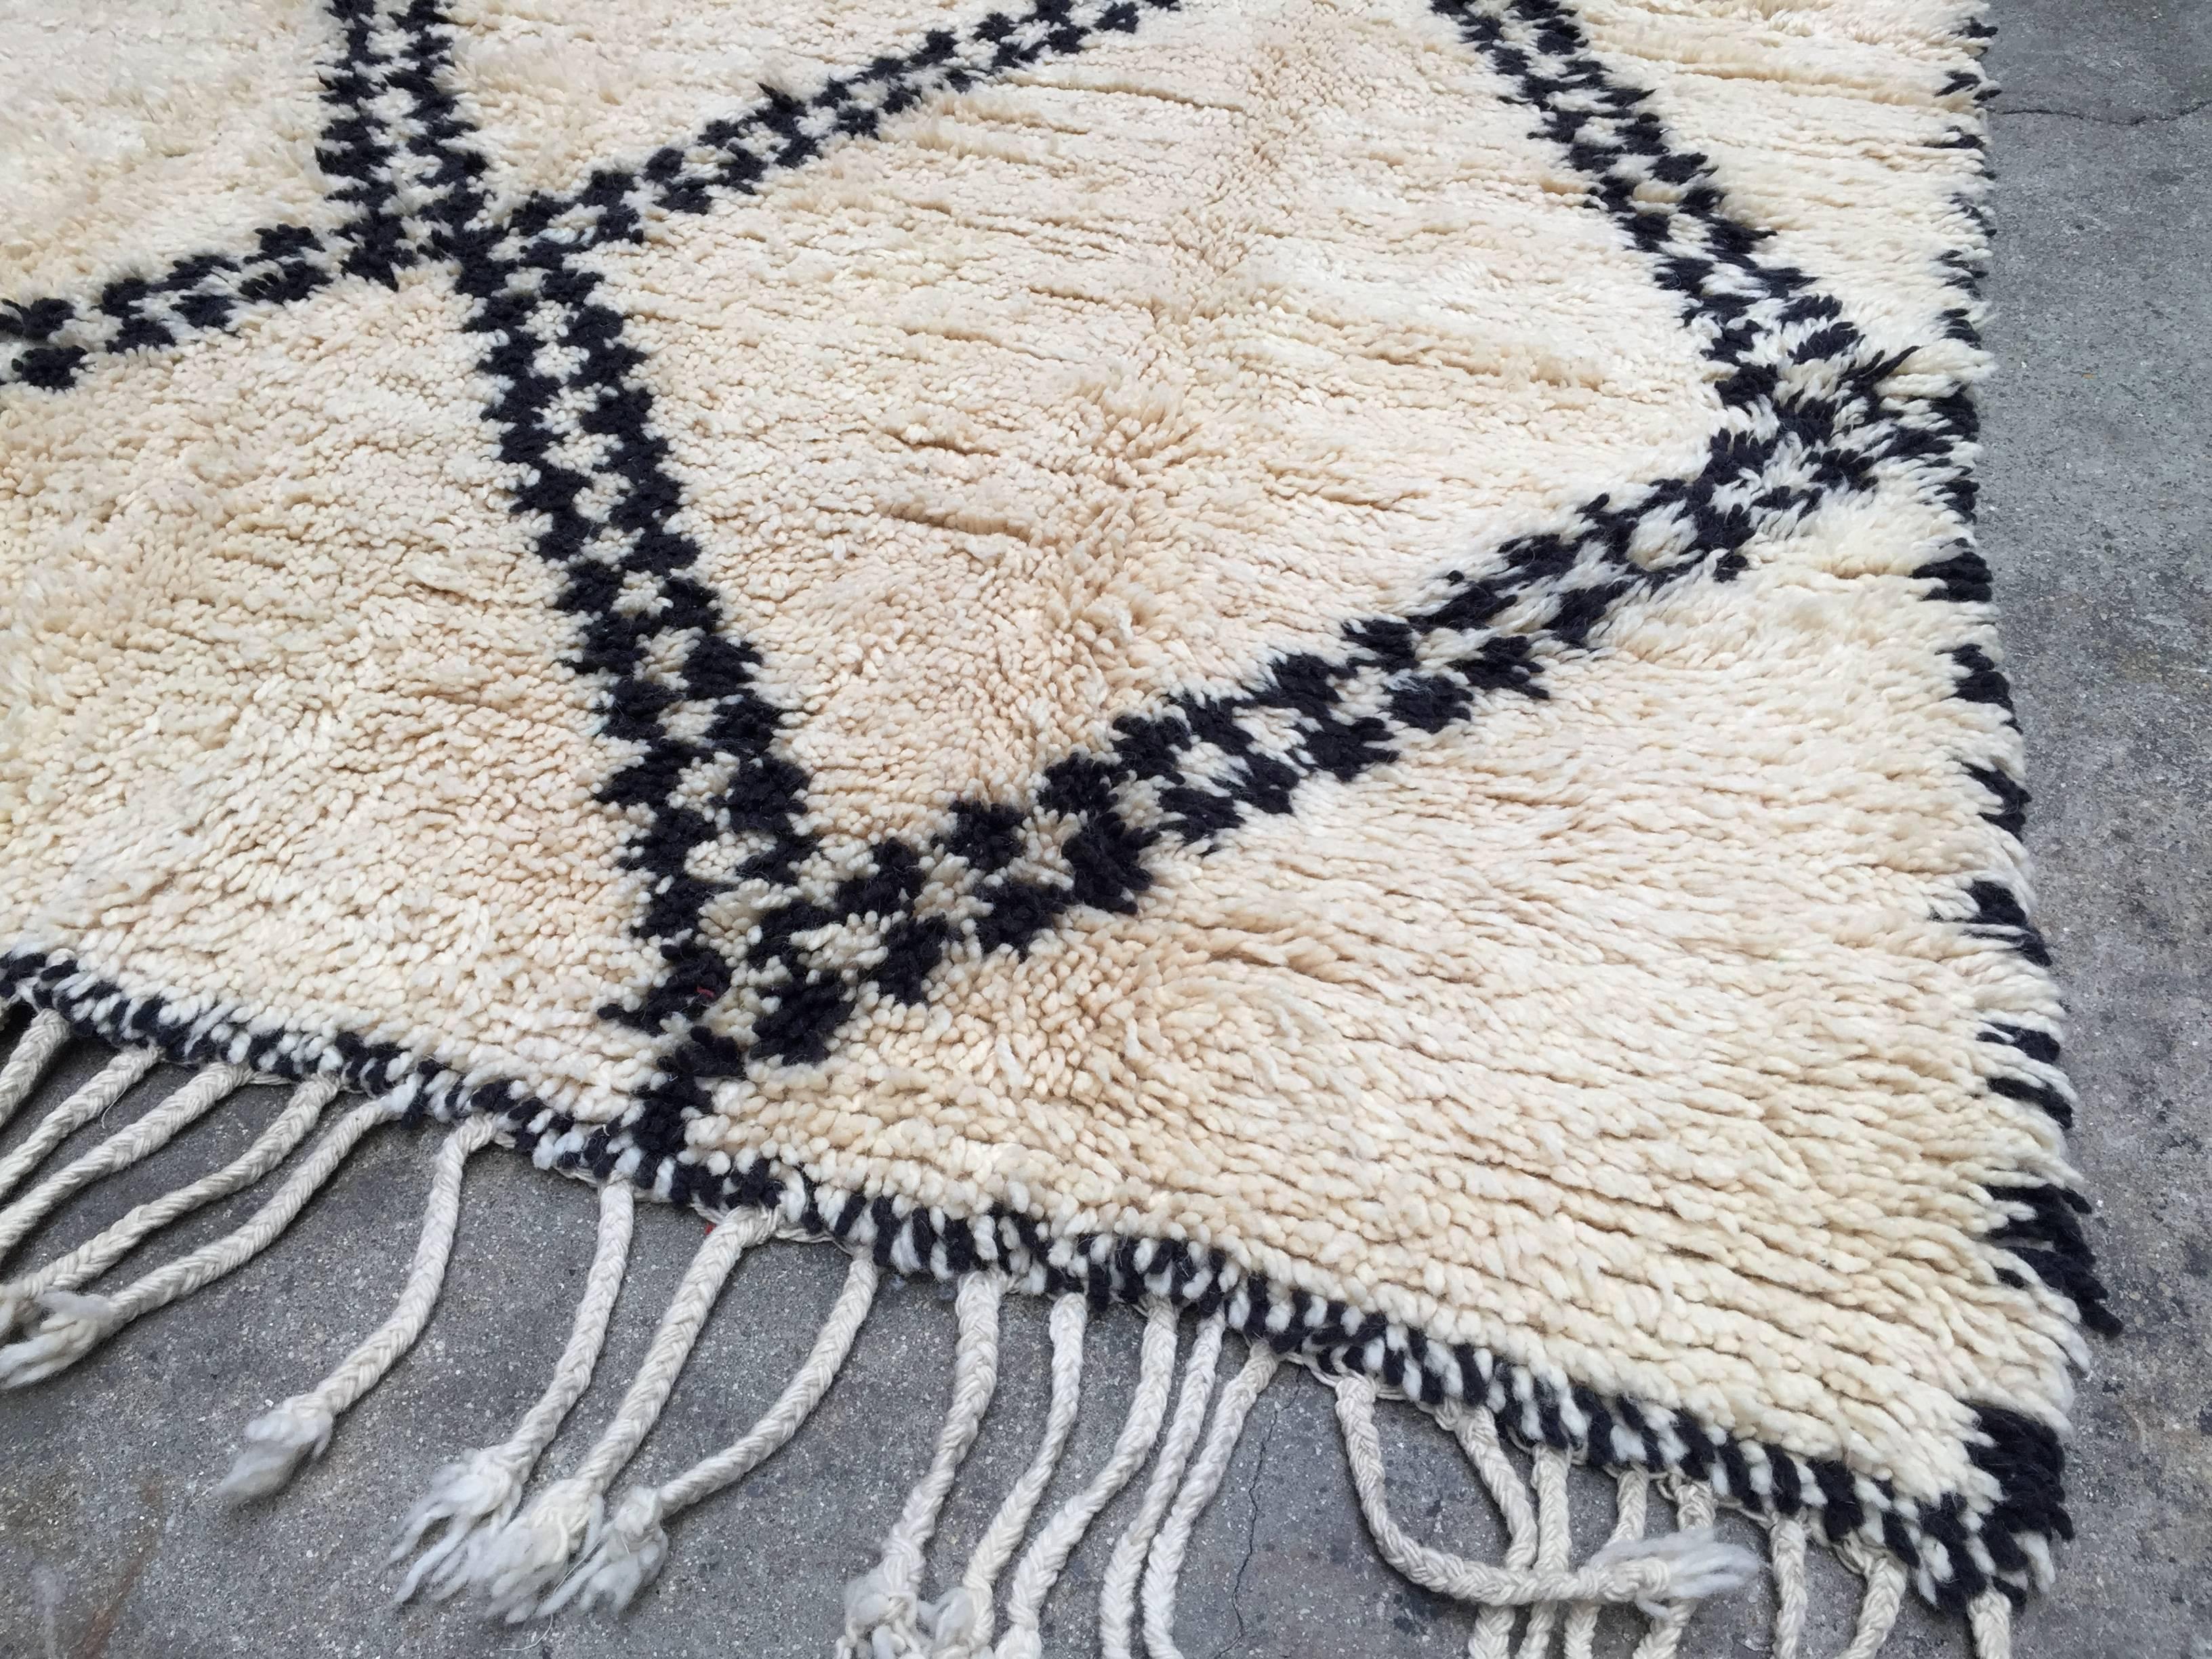 Hand-Knotted Beni Ourain Rug, Moroccan Berber Carpet